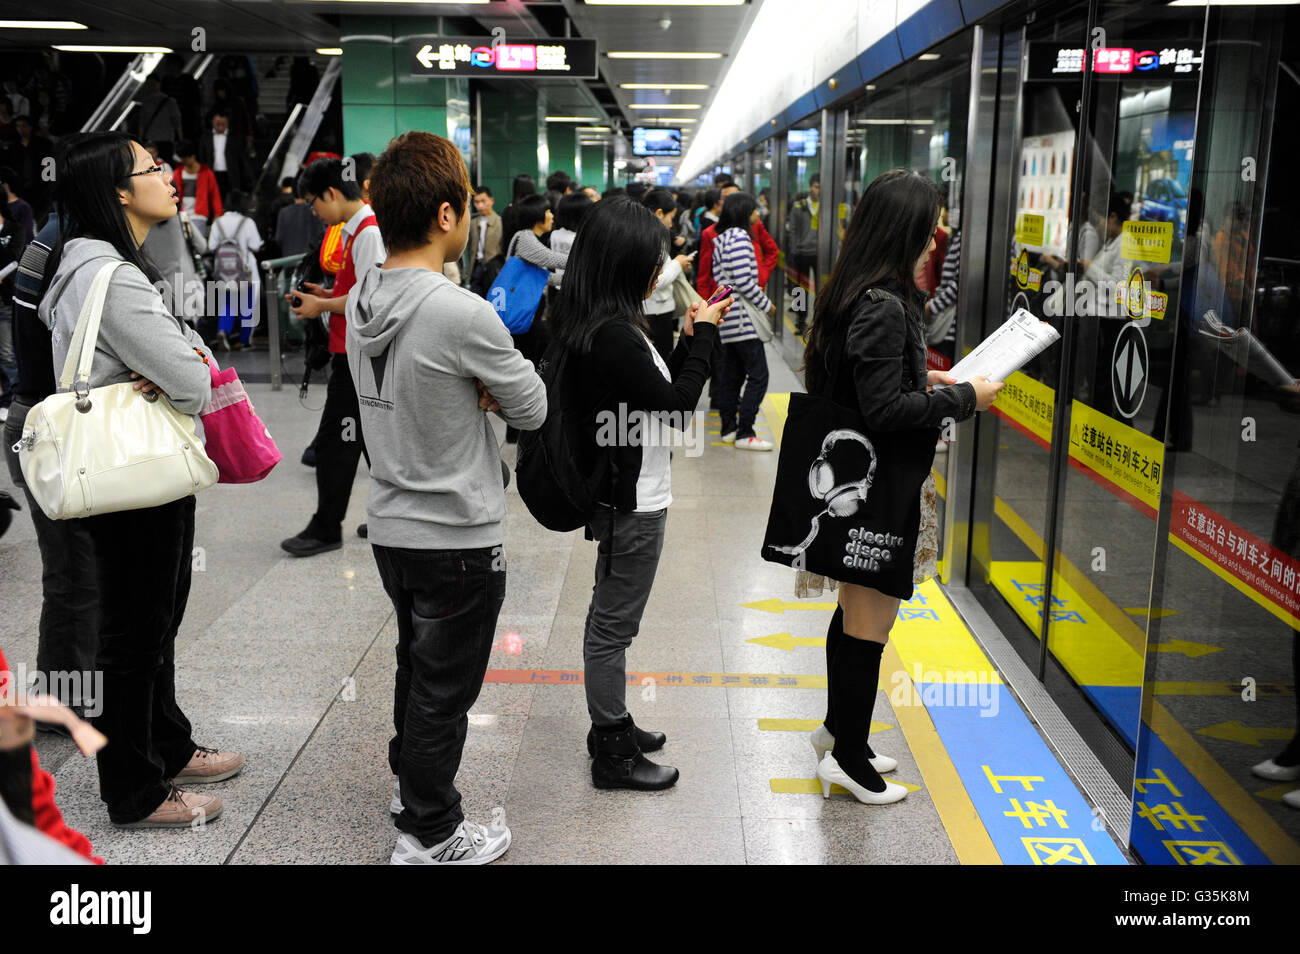 CHINA province Guangdong, city Guangzhou, people line up for metro train, public transport system, commuter Stock Photo